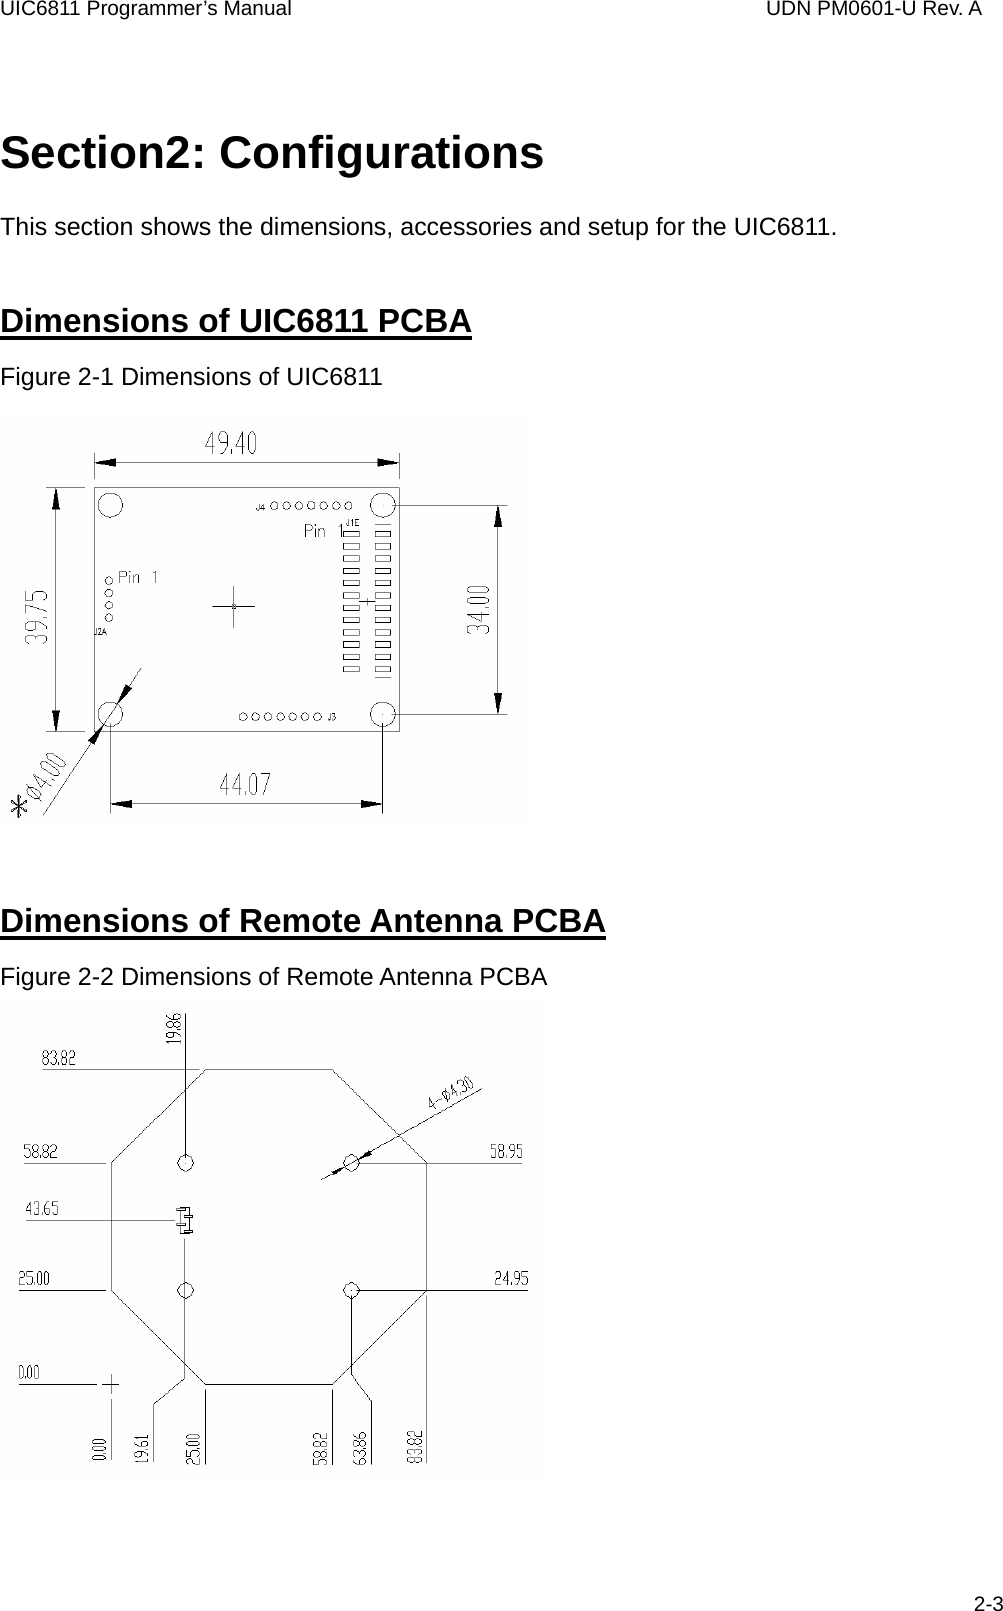 UIC6811 Programmer’s Manual                                  UDN PM0601-U Rev. A  Section2: Configurations This section shows the dimensions, accessories and setup for the UIC6811. Dimensions of UIC6811 PCBA Figure 2-1 Dimensions of UIC6811  Dimensions of Remote Antenna PCBA Figure 2-2 Dimensions of Remote Antenna PCBA      2-3